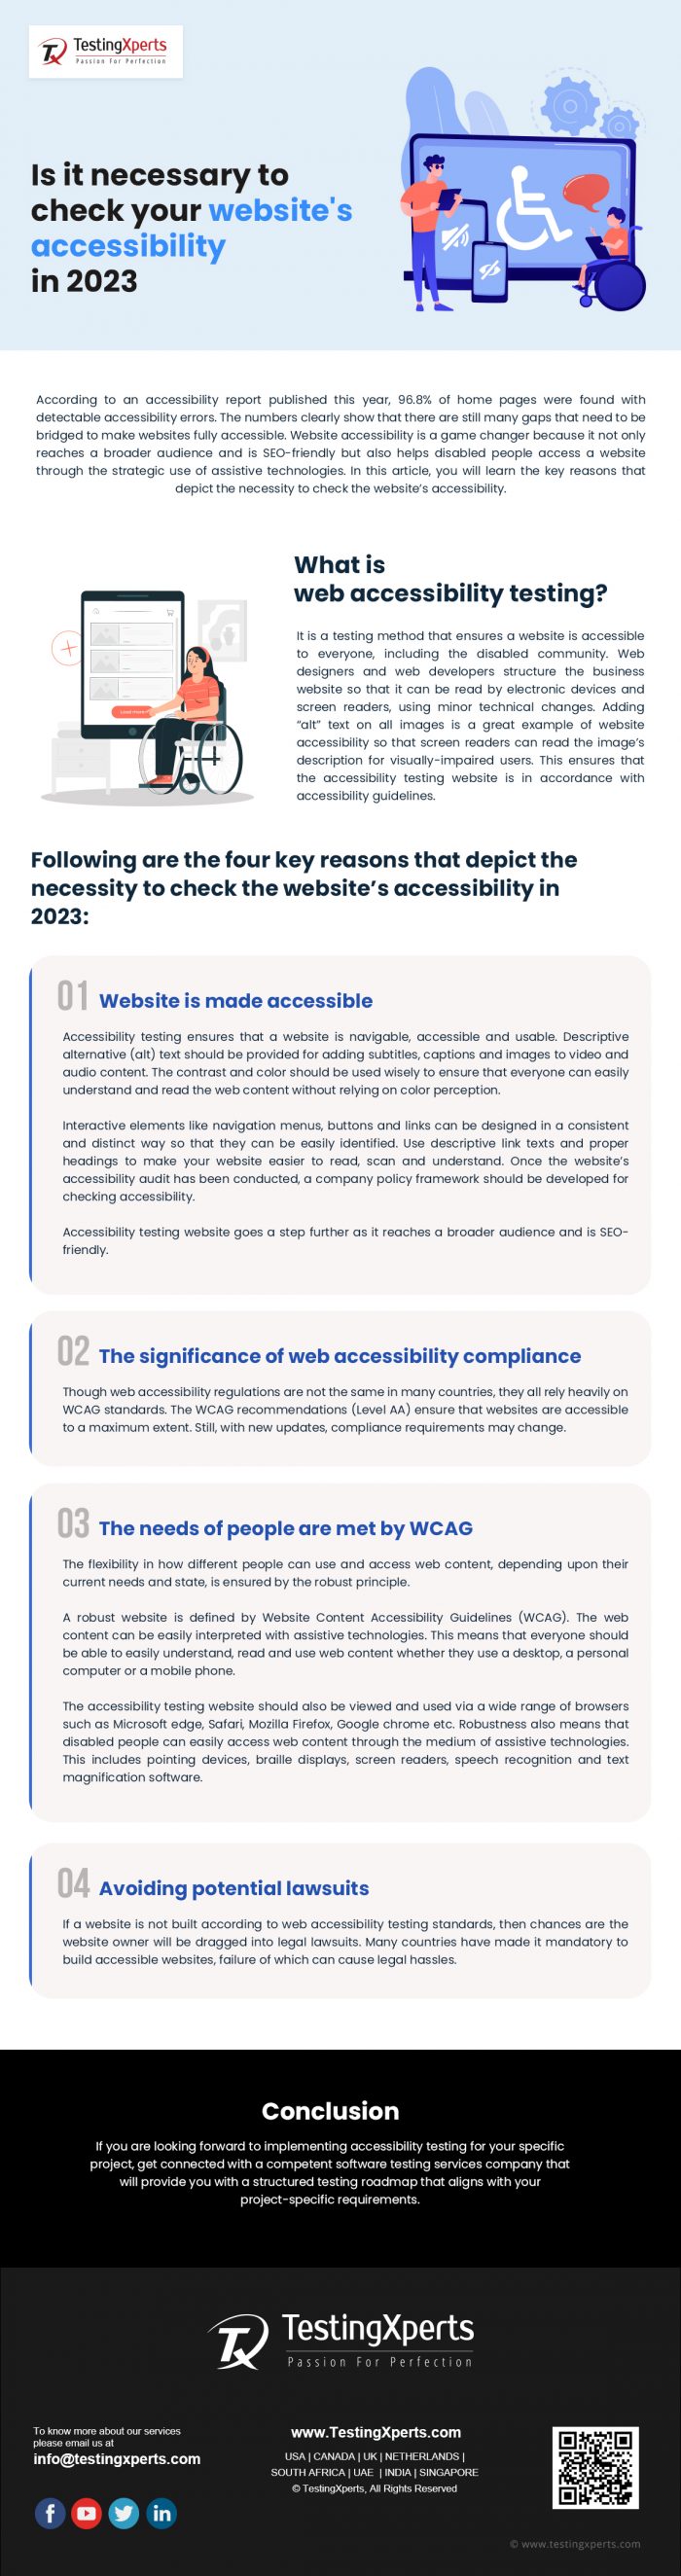 Is it Necessary to Check your Website’s Accessibility in 2023?